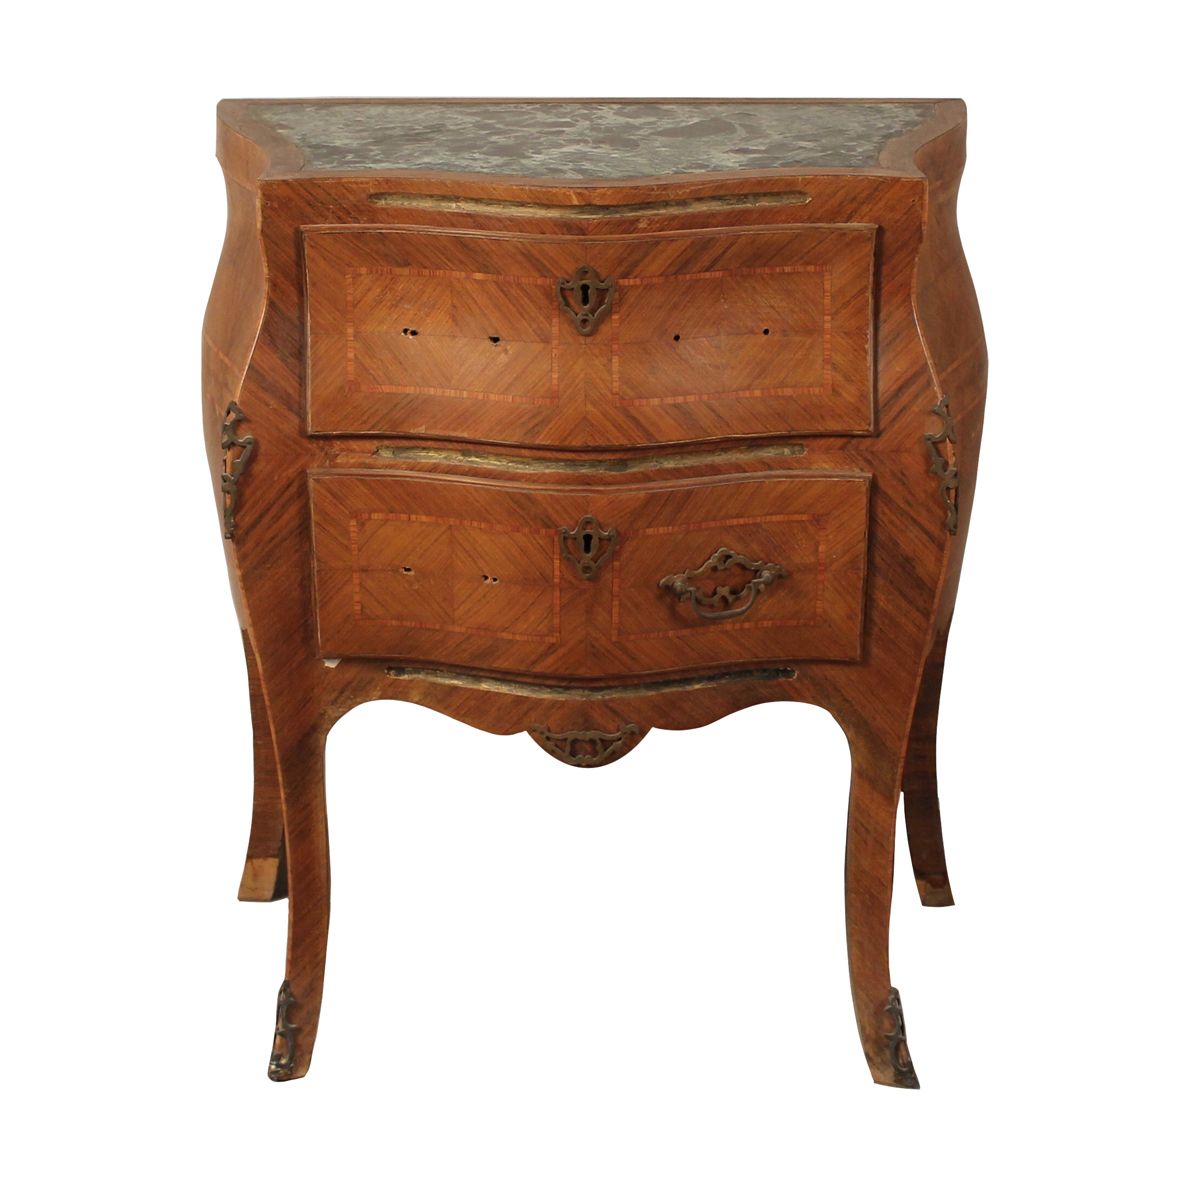 CASSETTONCINO A DUE CASSETTI - SMALL COMMODE WITH TWO DRAWERS Palisander mit Ein&hellip;